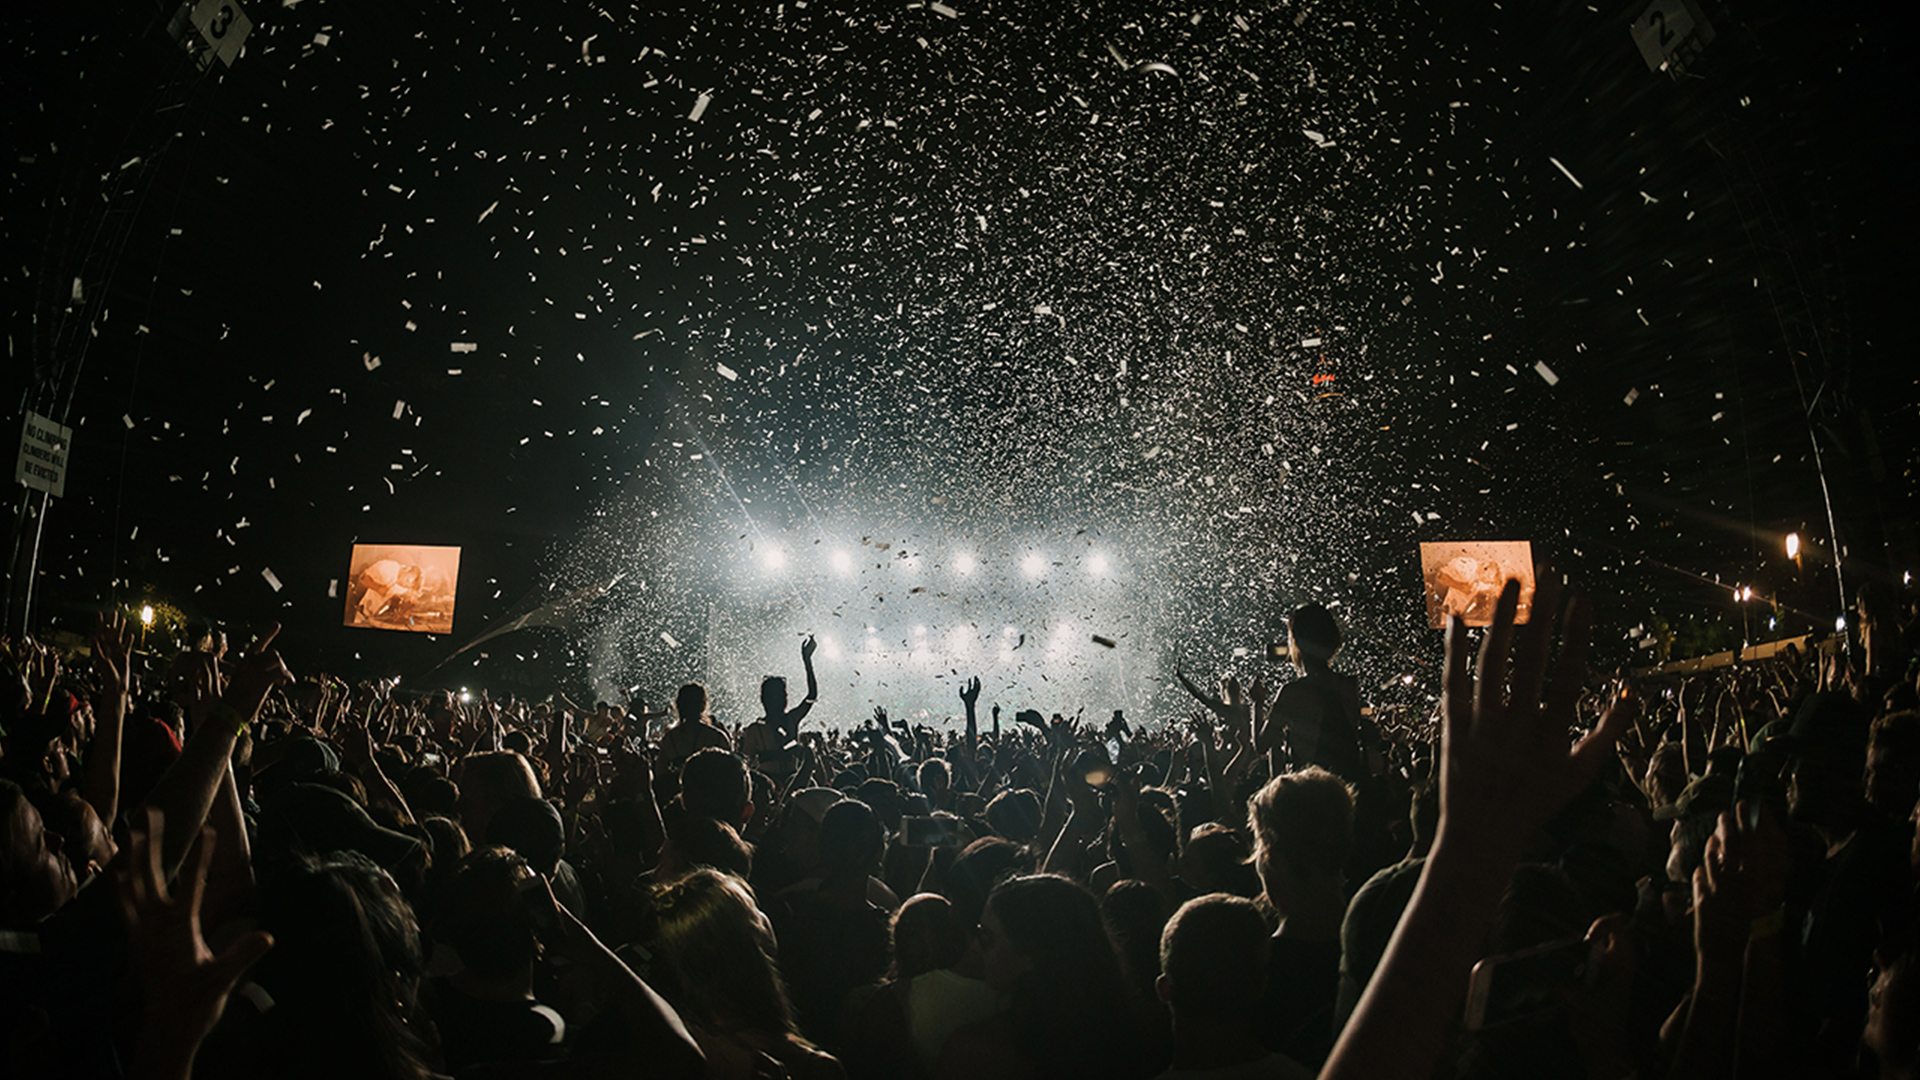 Large crowd with their hands up in the air at a festival at night, bright lights coming from the stage and confetti falling onto the crowd